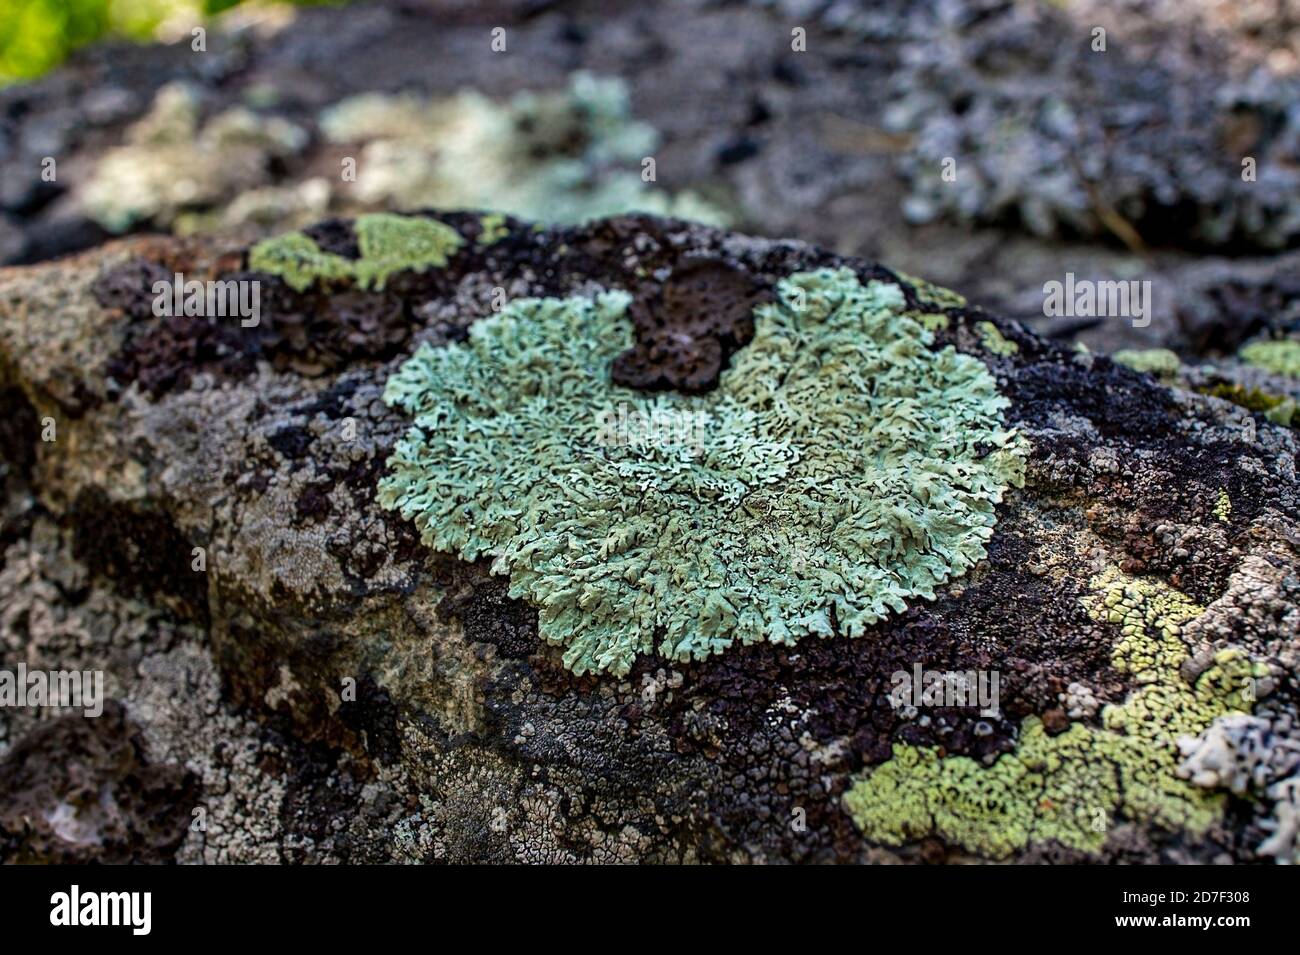 Green textured lichens in the shape of a heart close-up on a stone in the forest. Flavoparmelia caperata Stock Photo